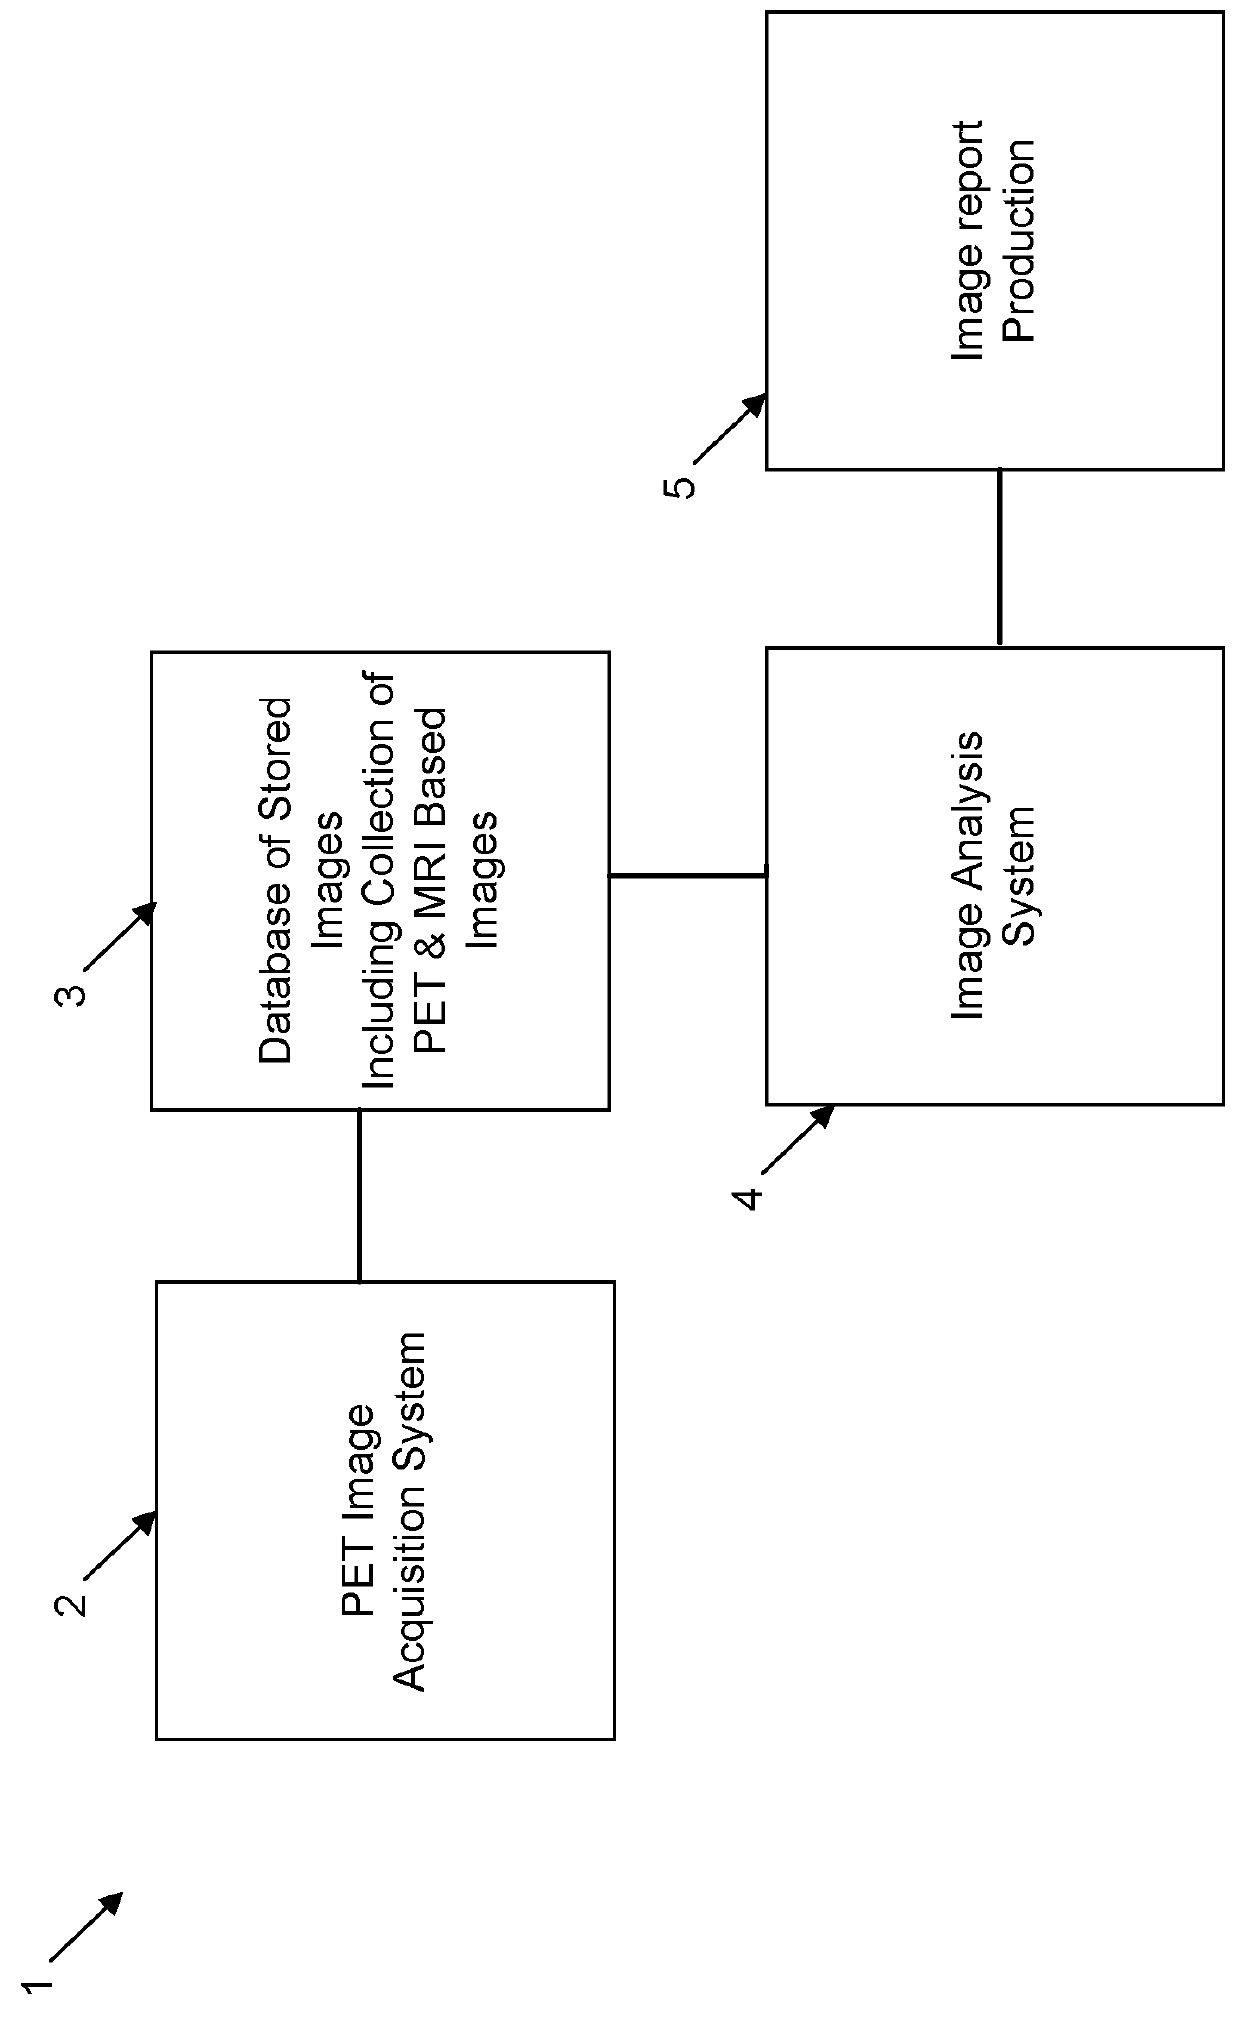 Method and apparatus for the assessment of medical images